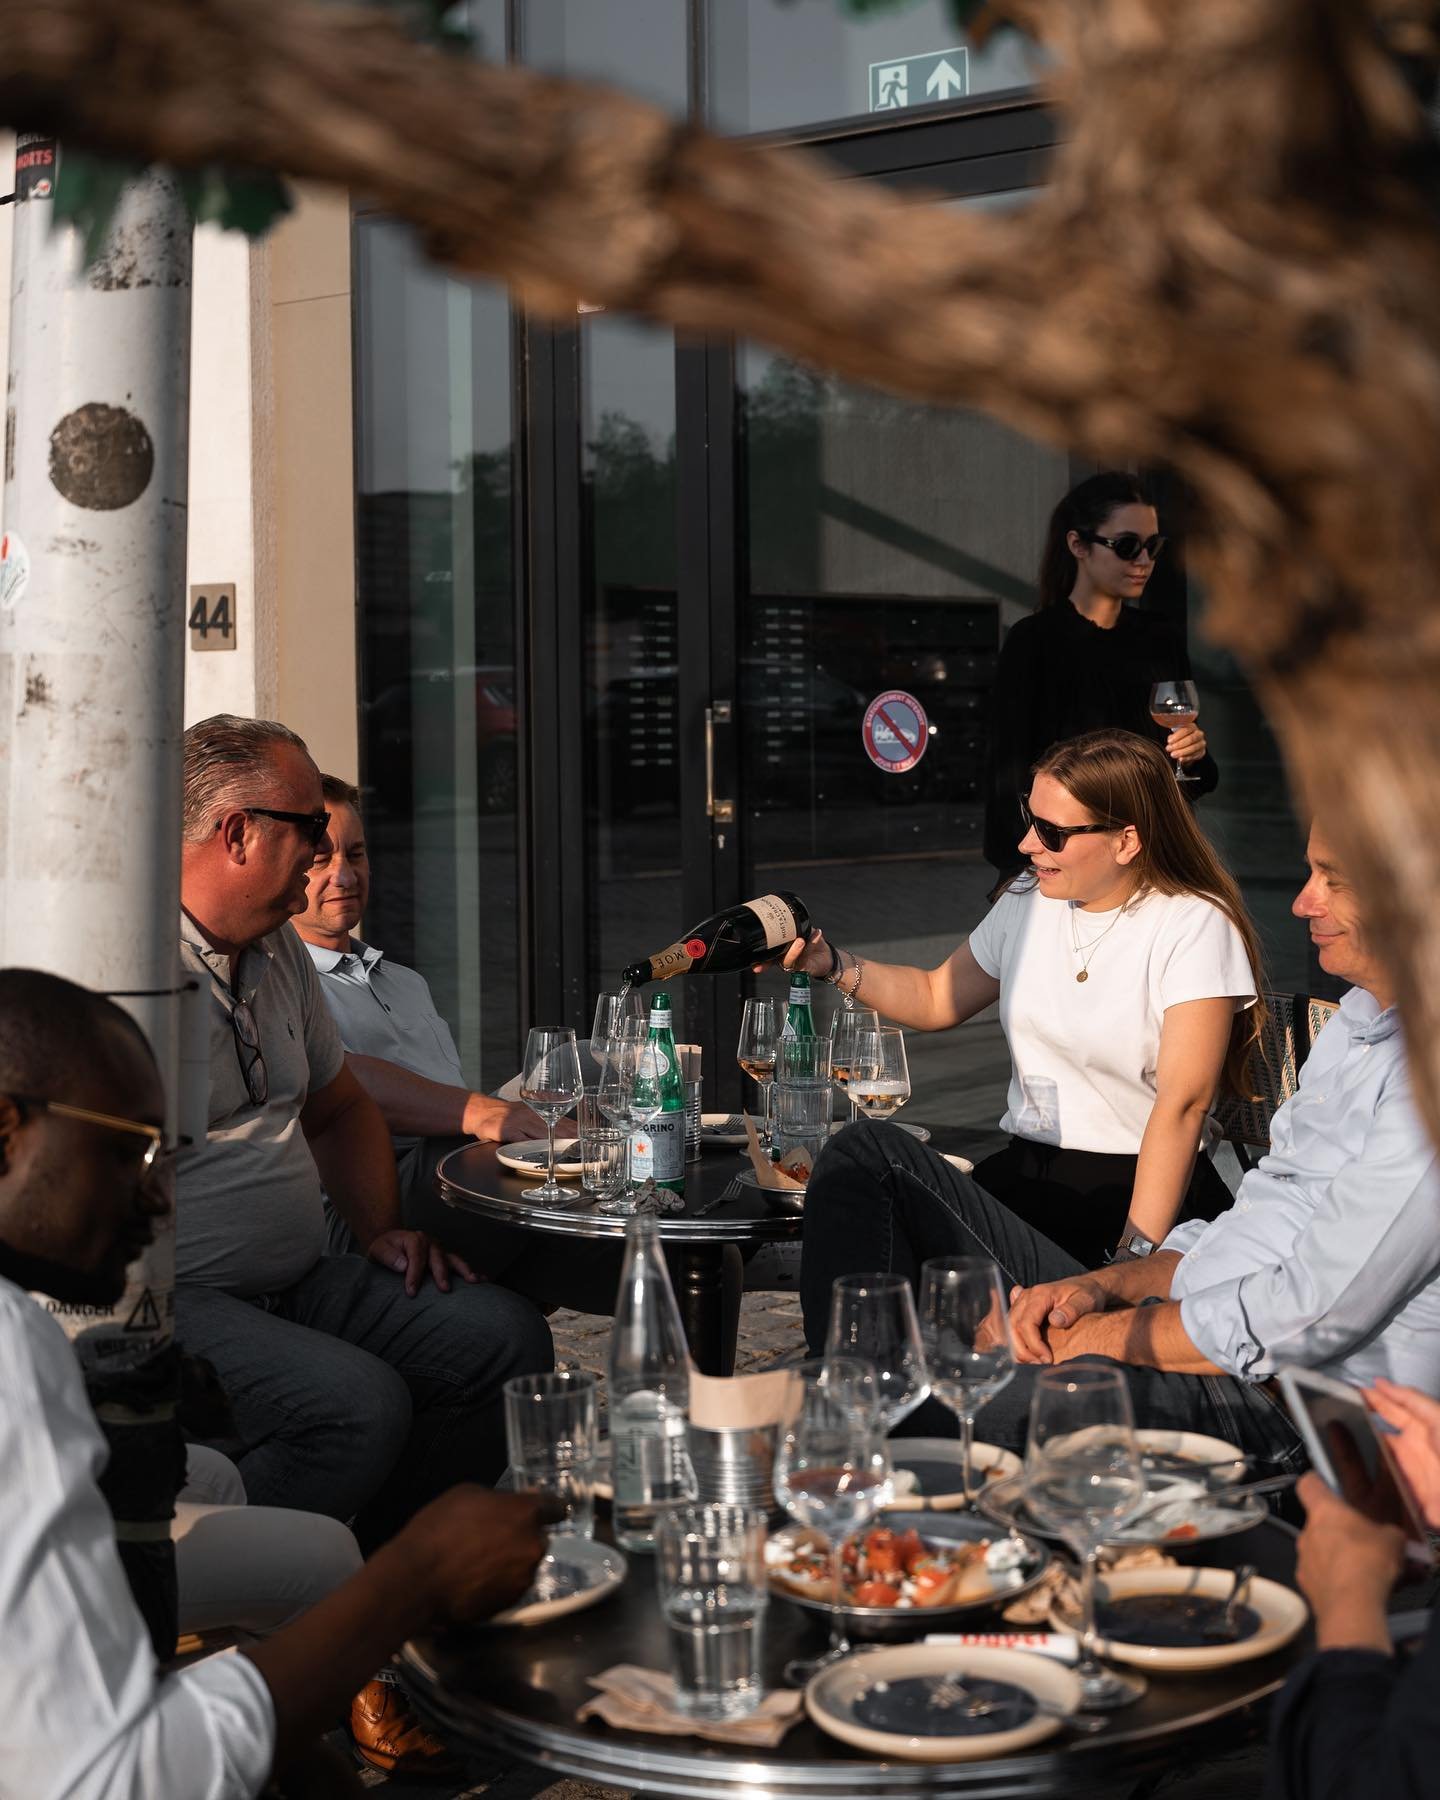 WE ARE OPEN TODAY 🔥

You&rsquo;re welcome for Brunch from 10am till 2.45pm. 🥞🍳🥑🥐

📍 Grand Canal - Quai des p&eacute;niches 44B - 1000 Bruxelles

#GrandCanal #SunsetBar #FoodieBrussels #TerraceBrussels #BrunchBrussels